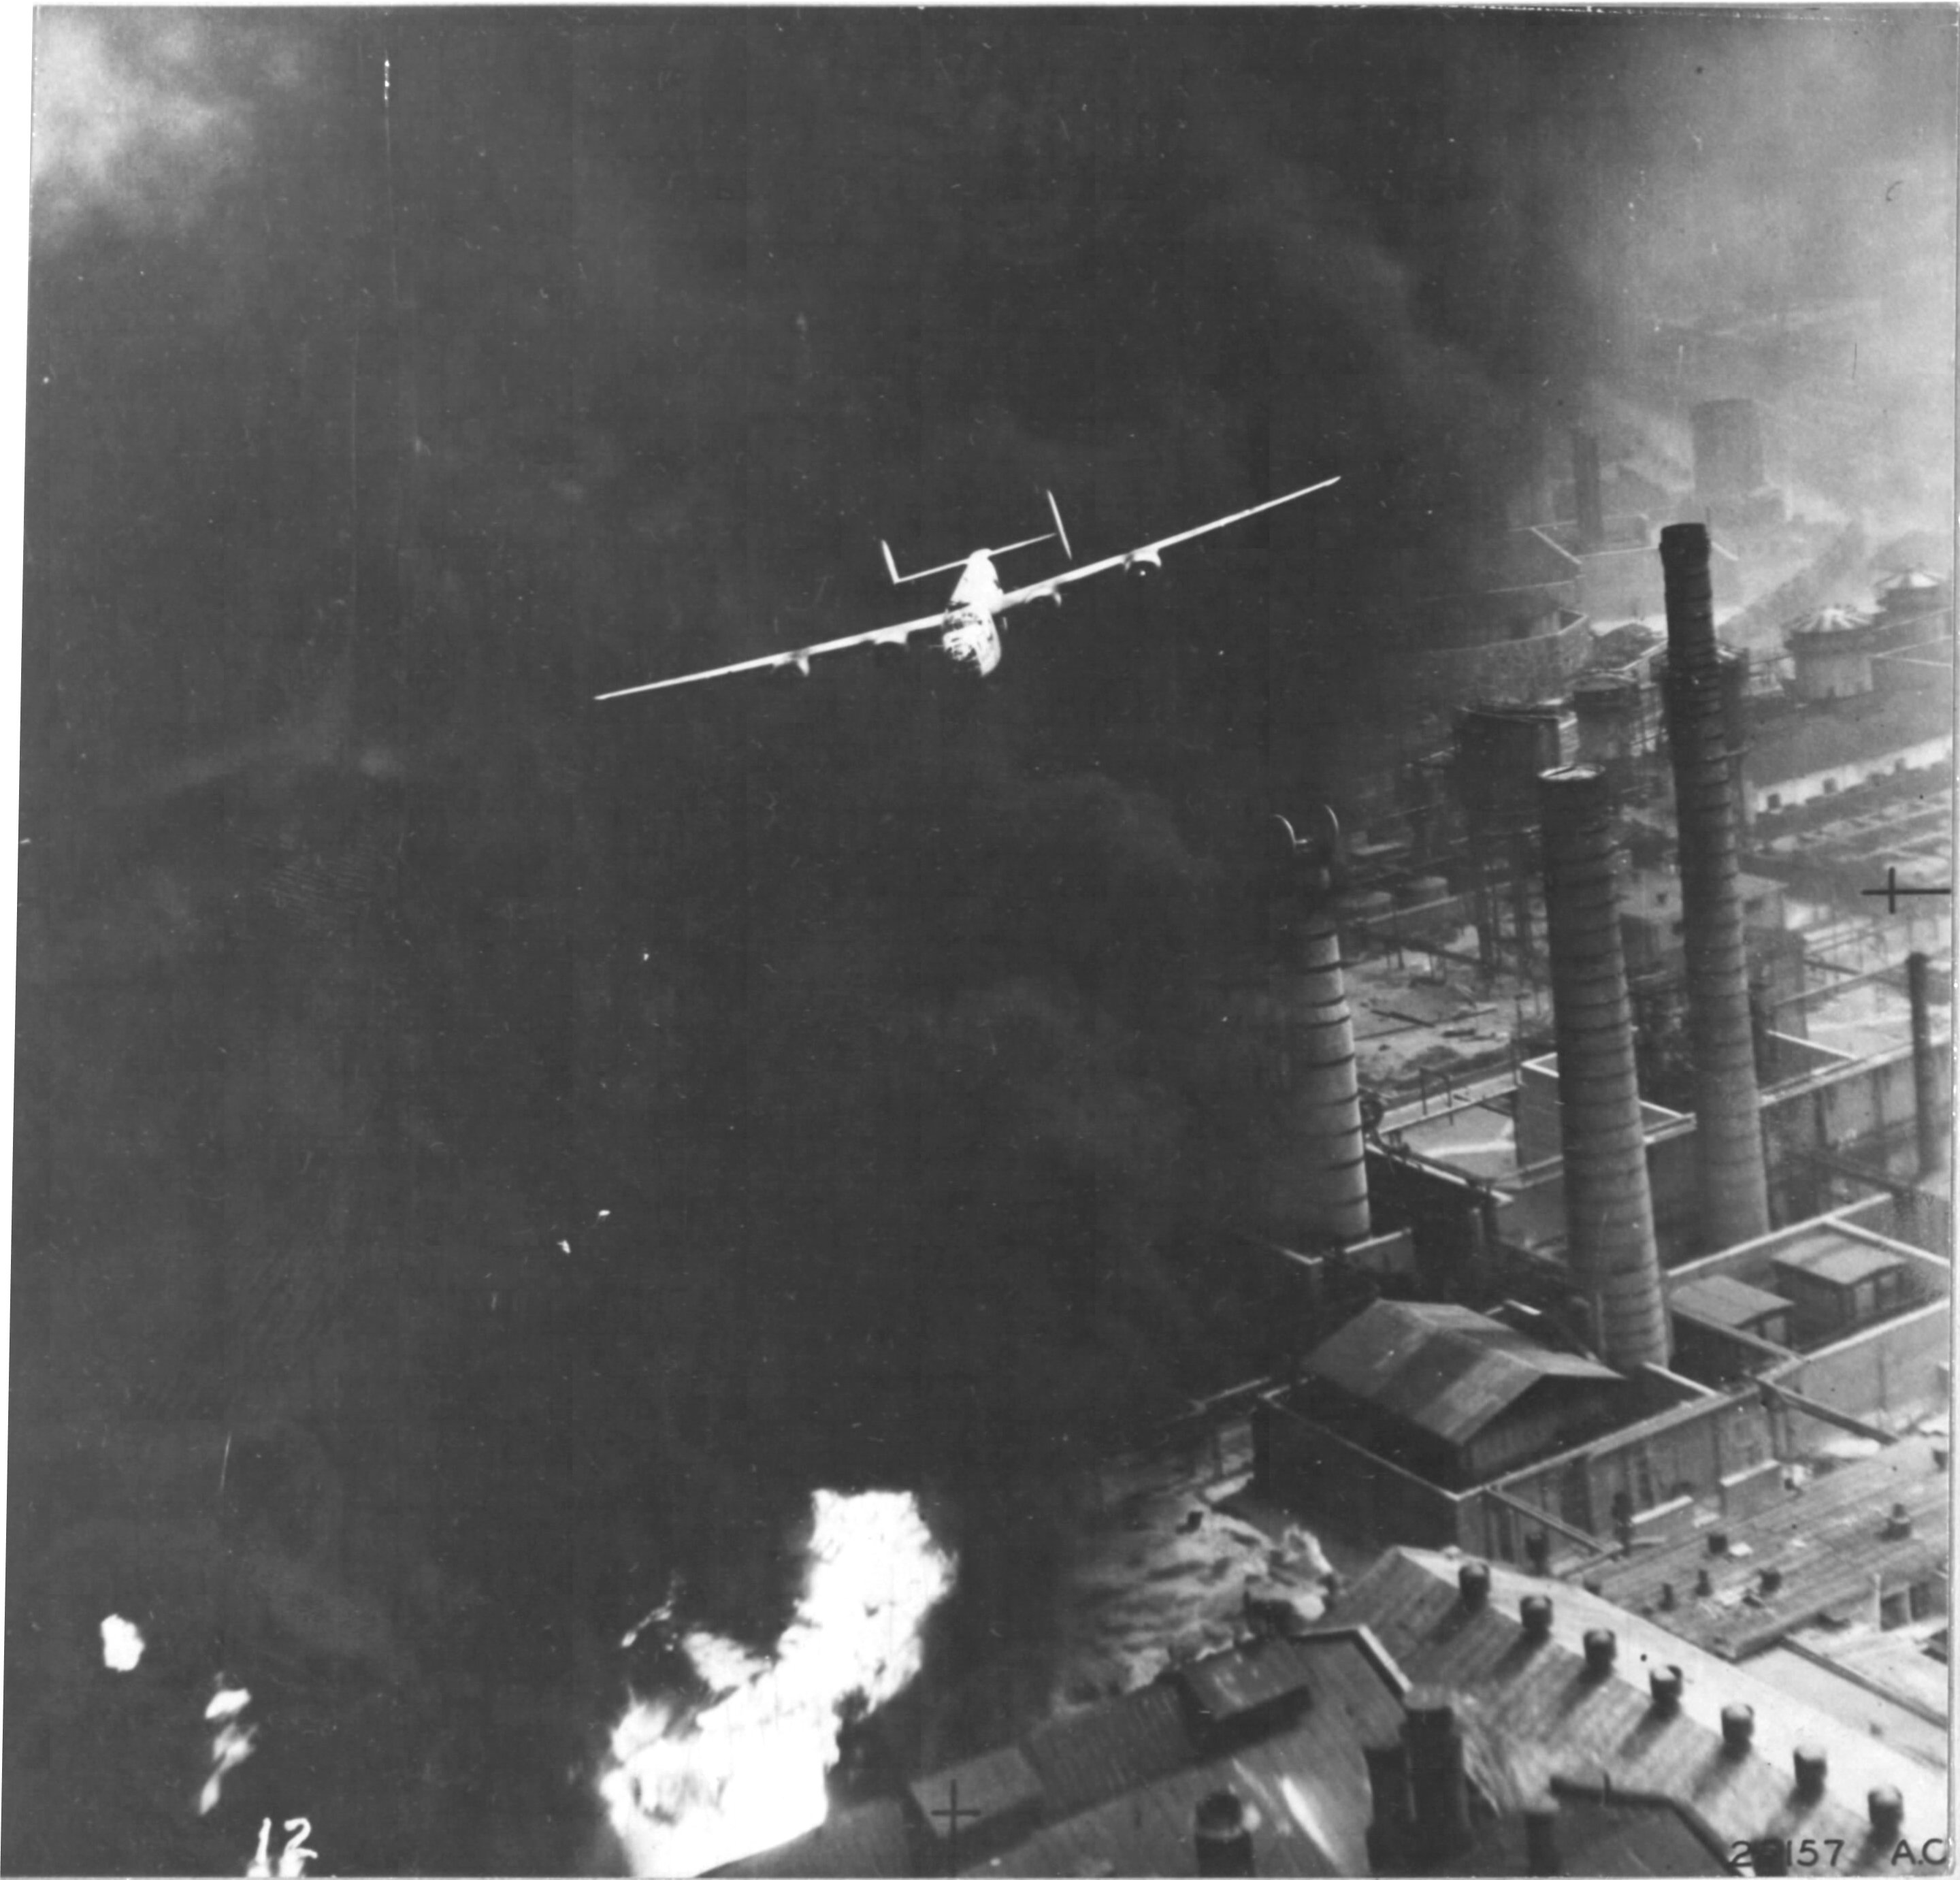 B-24D Liberator “The Sandman” of the 345th Bomb Squadron over the burning Astra Romania oil refinery in Ploesti, Romania during Operation Tidal Wave, Aug 1 1943.